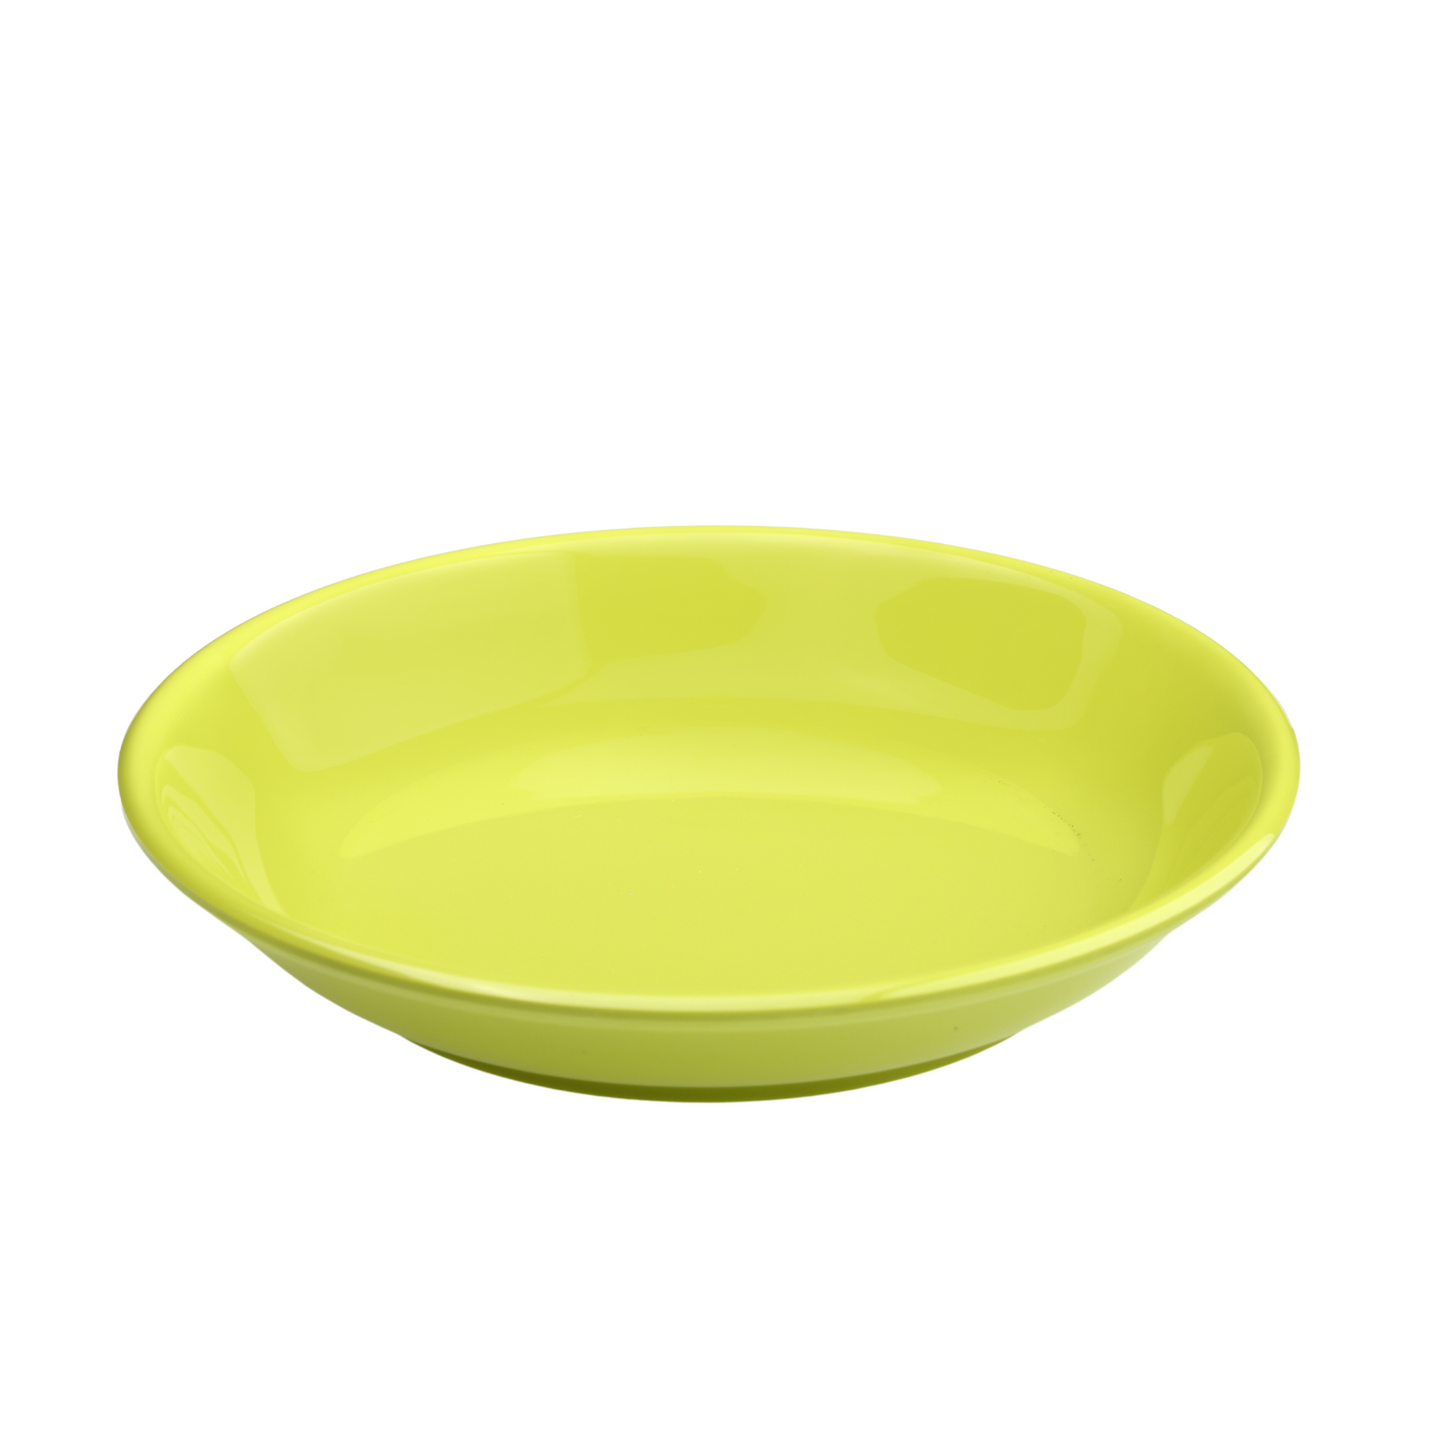 The Plate Story - Snack Plate 6.5” for Toddler - Lime Green